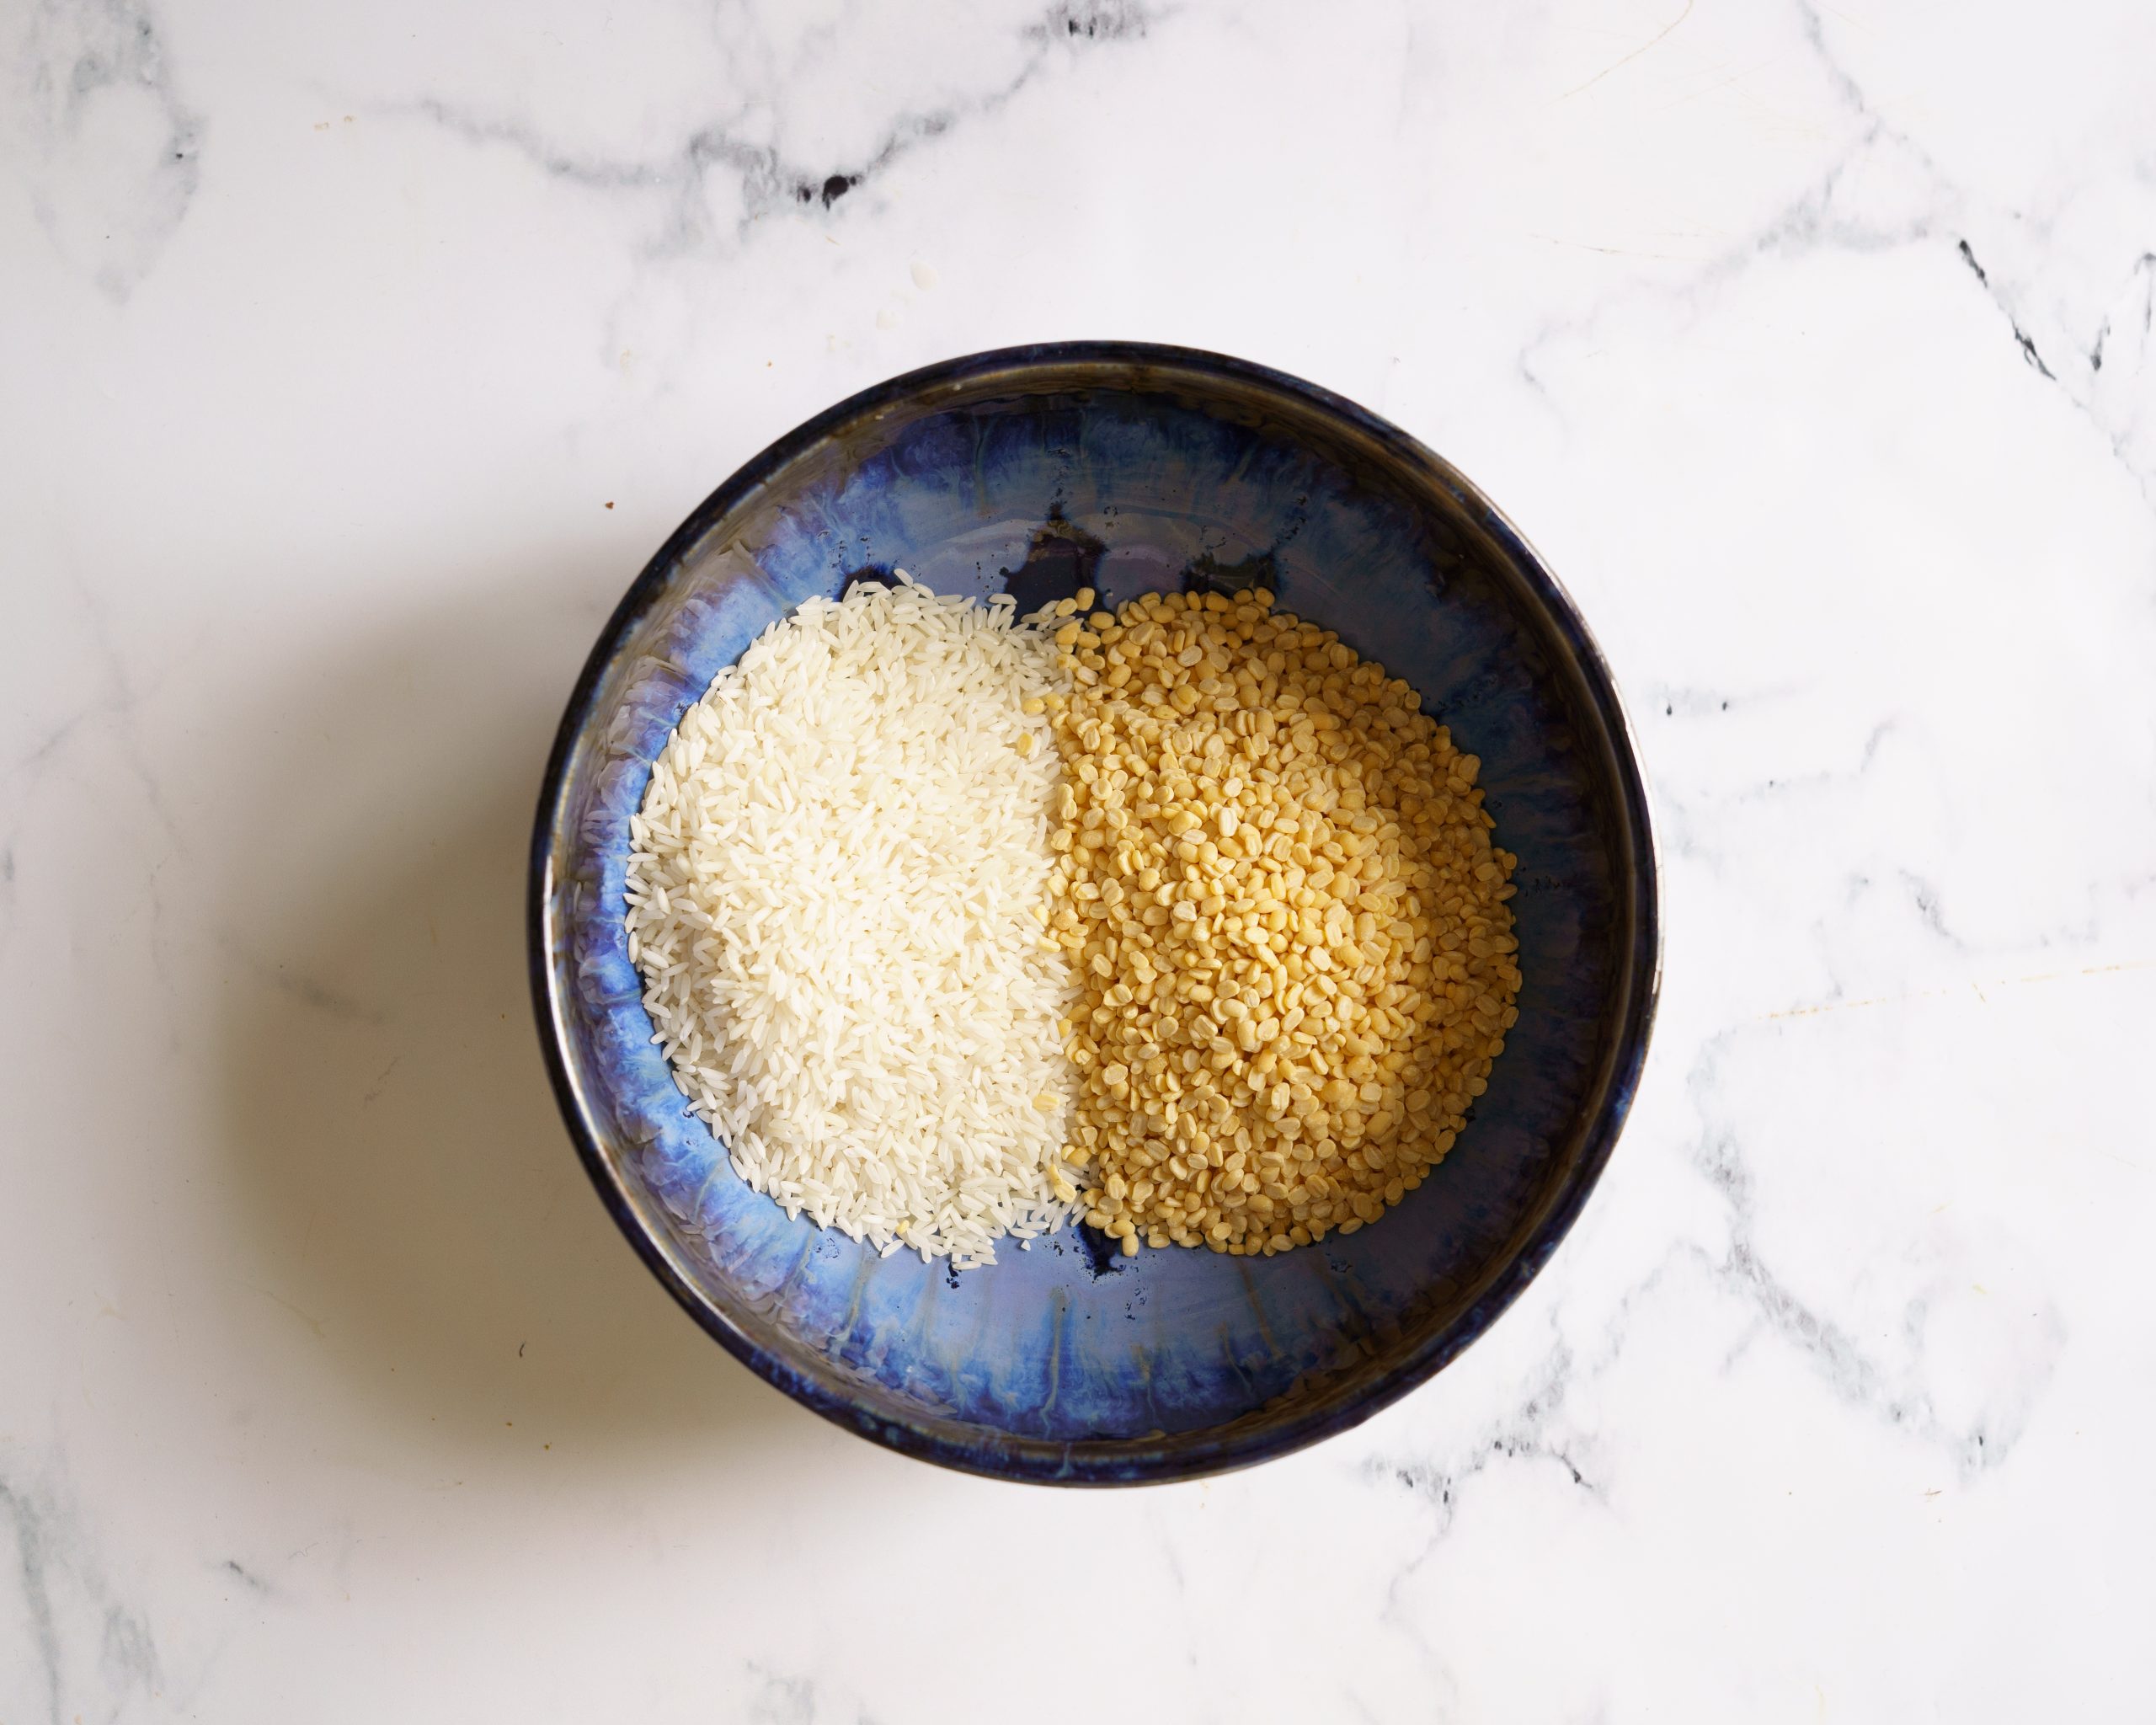 washing rice and dal in a blue bowl to make khichdi